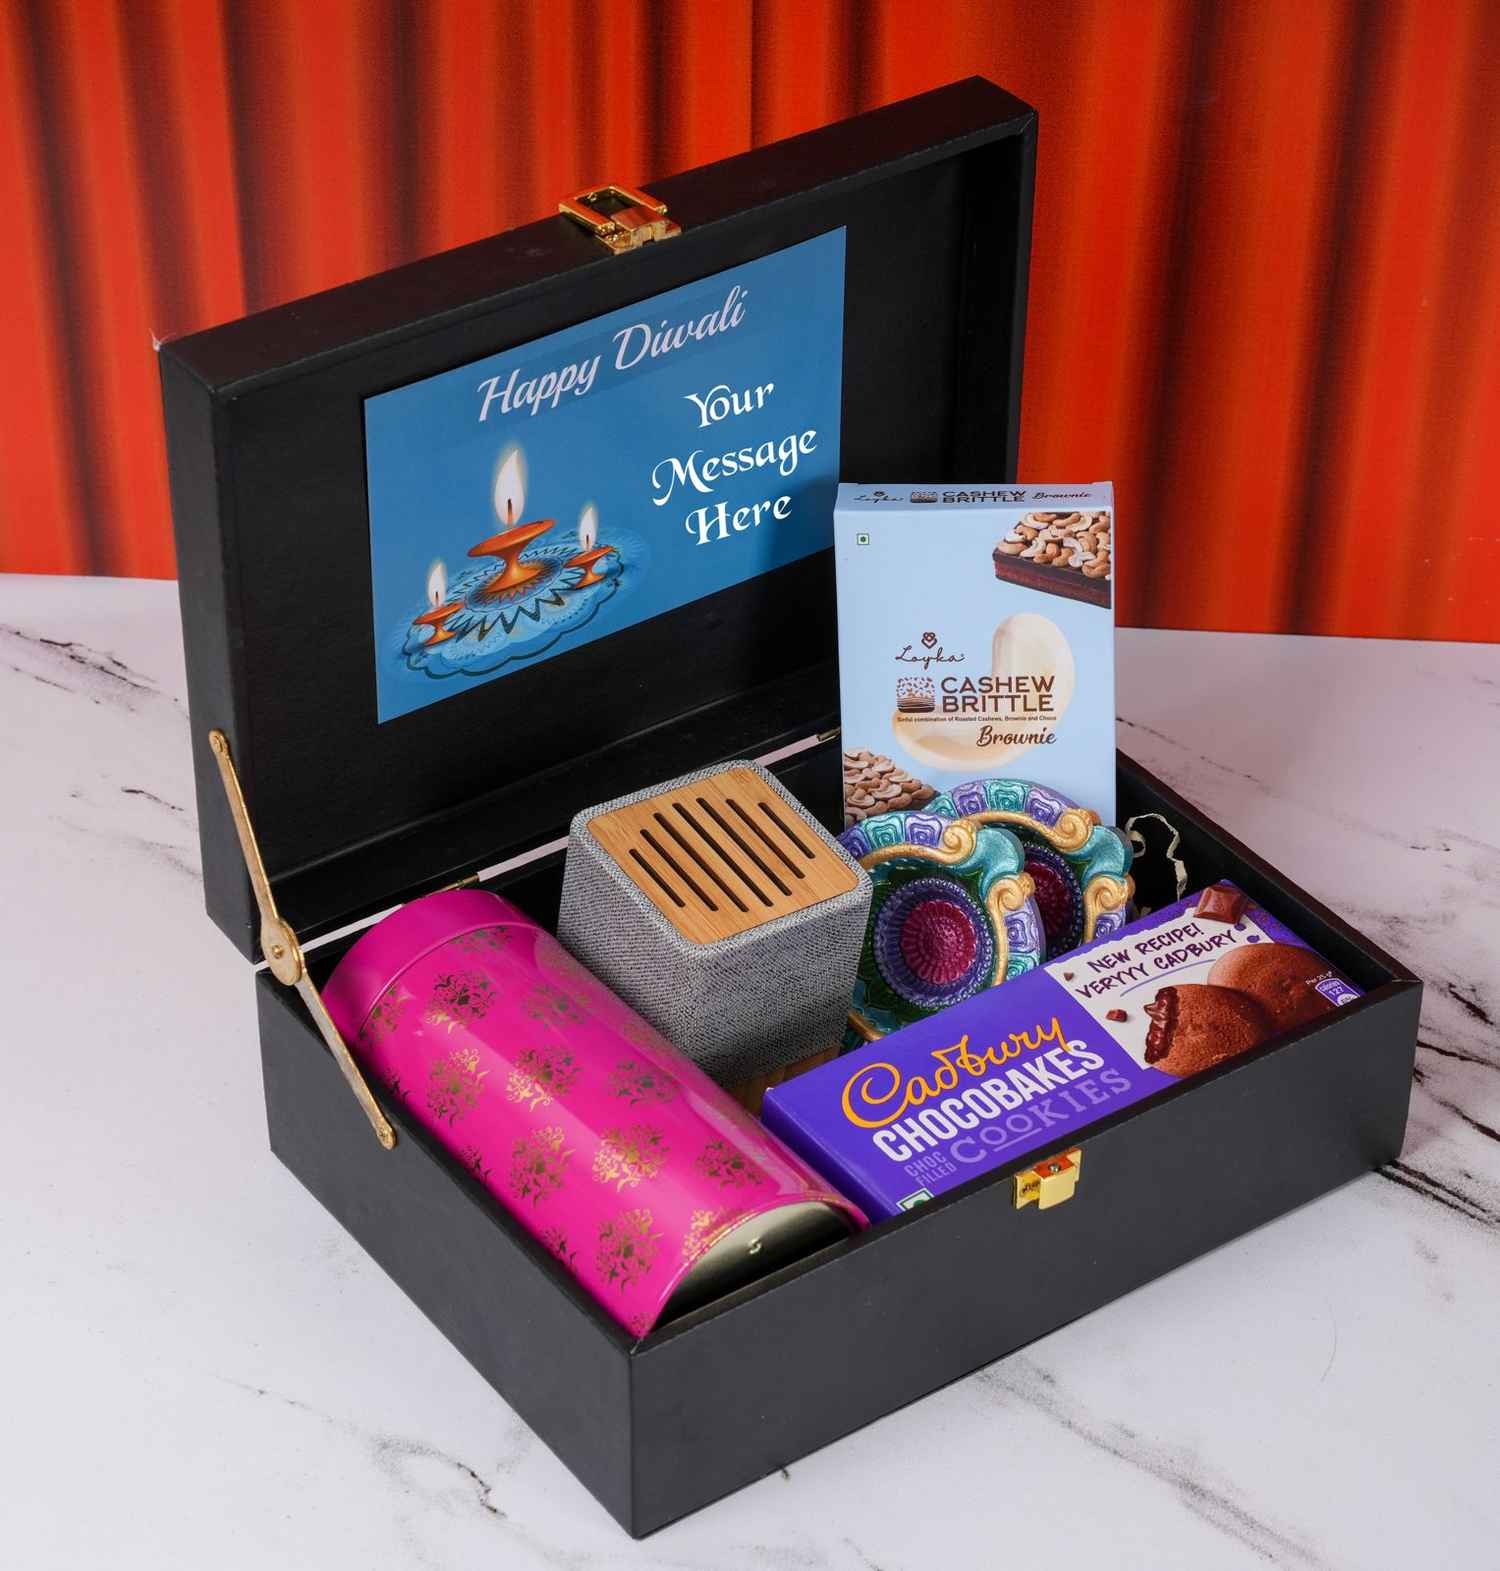 Top 10 corporate diwali gifts ideas for employees - Corporate Gift ideas  for employees